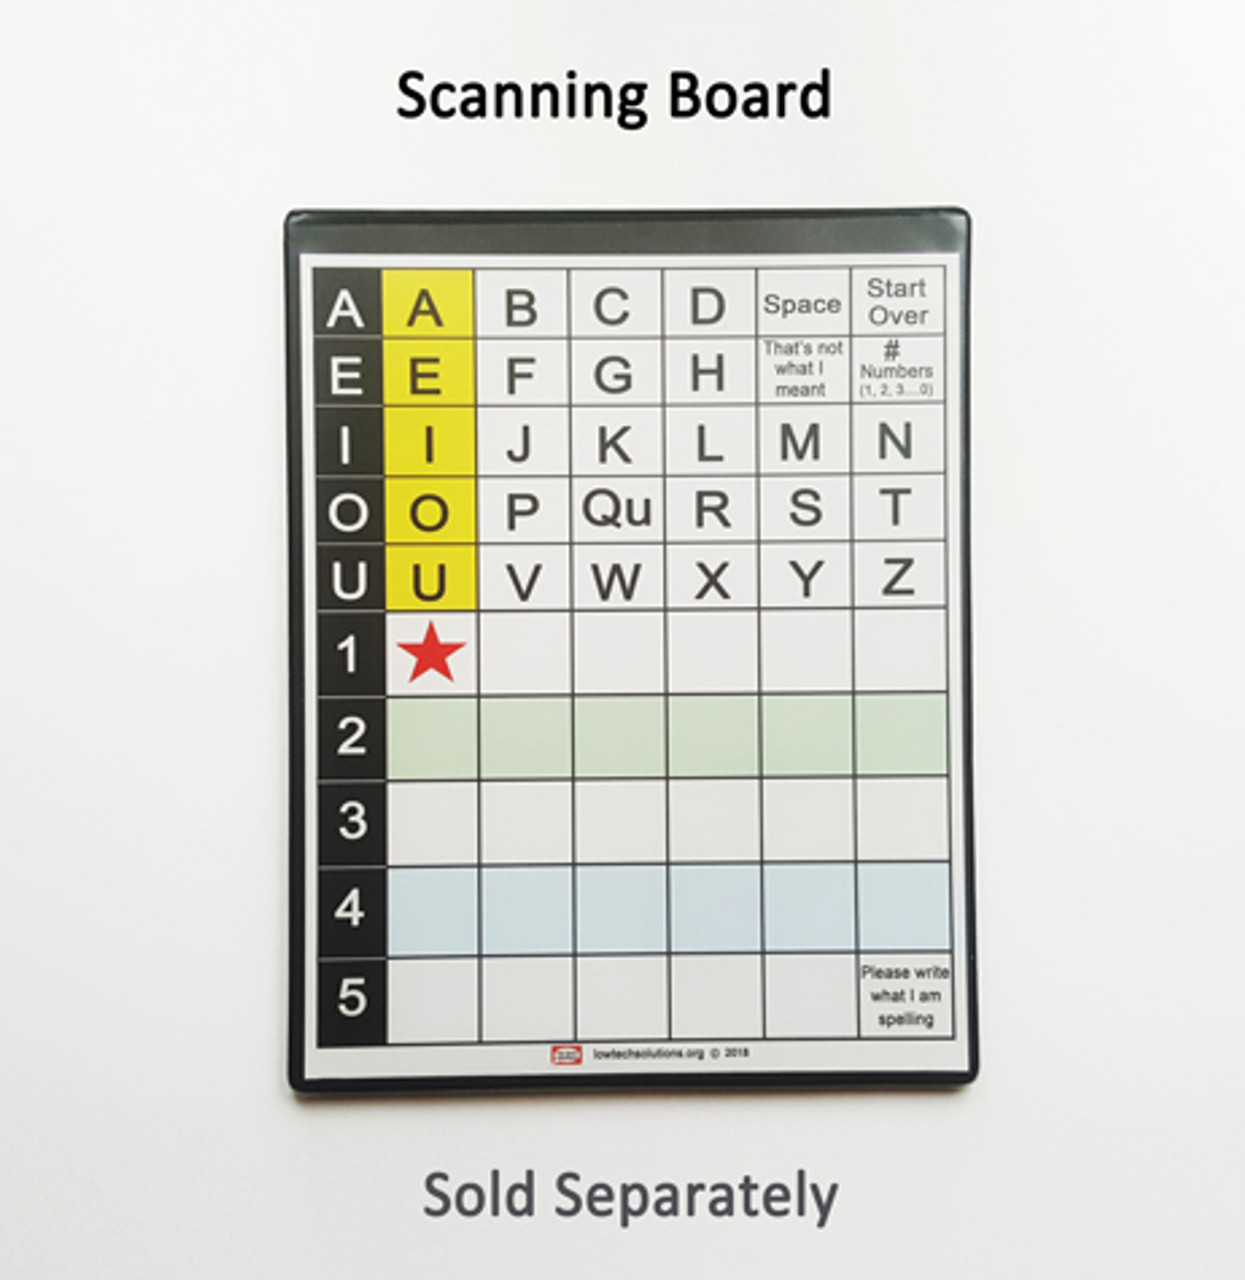 Scanning Board Sold Separately, as an add-on